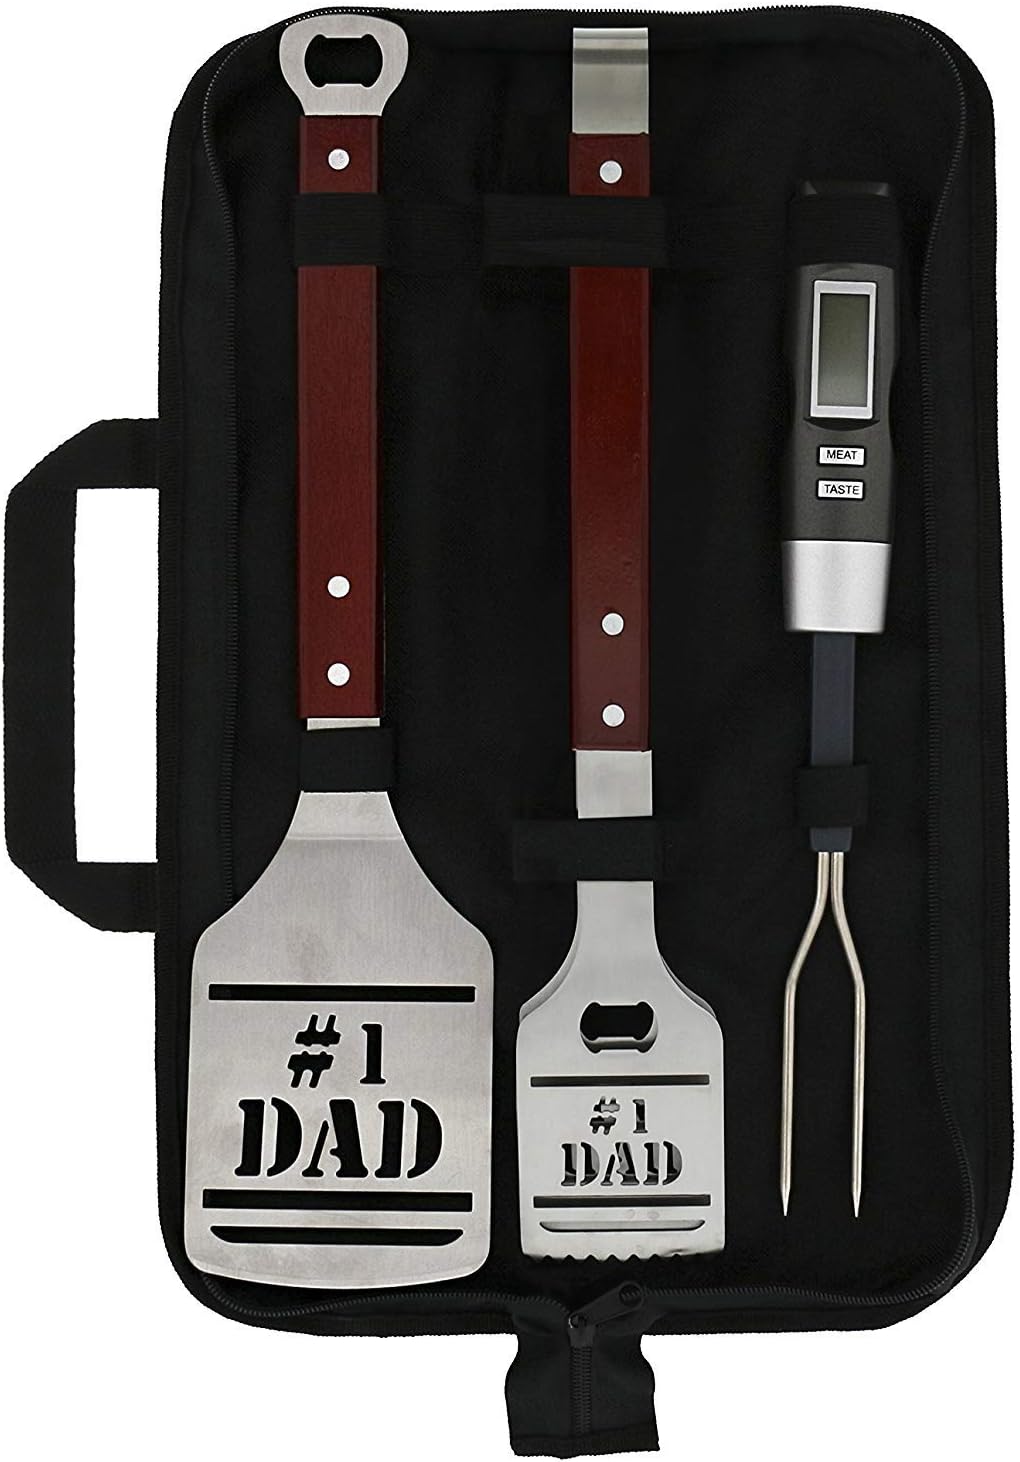 dad grilling toolkit fathers day gift